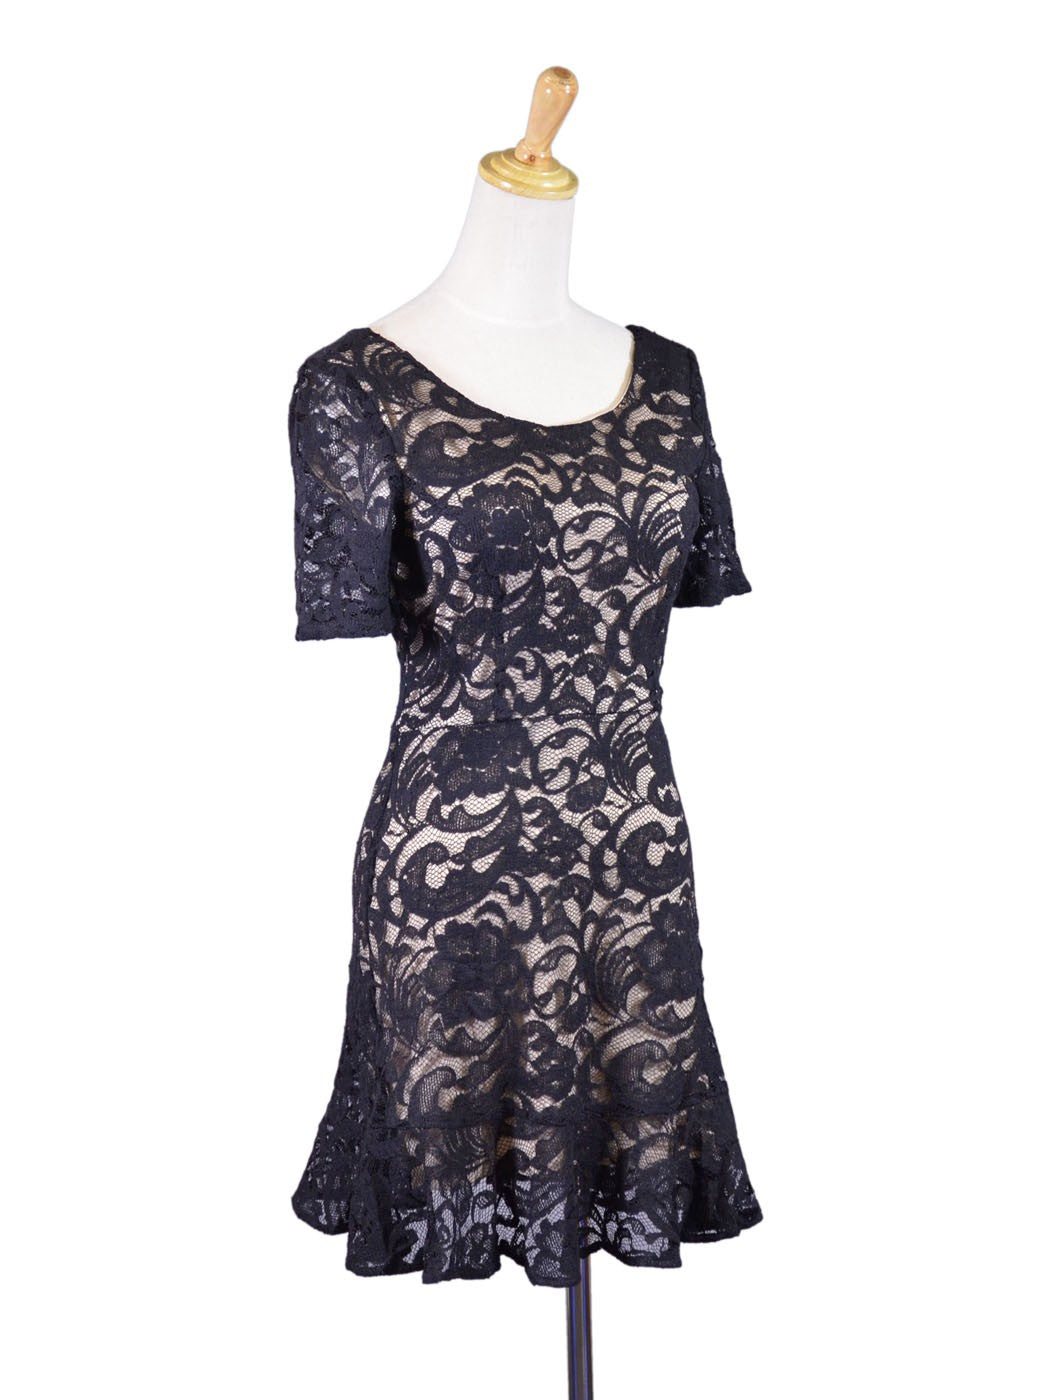 Lush Night Cocktail Floral Lace Design Ruffle Hem Short Sleeves Fit Flare Dress